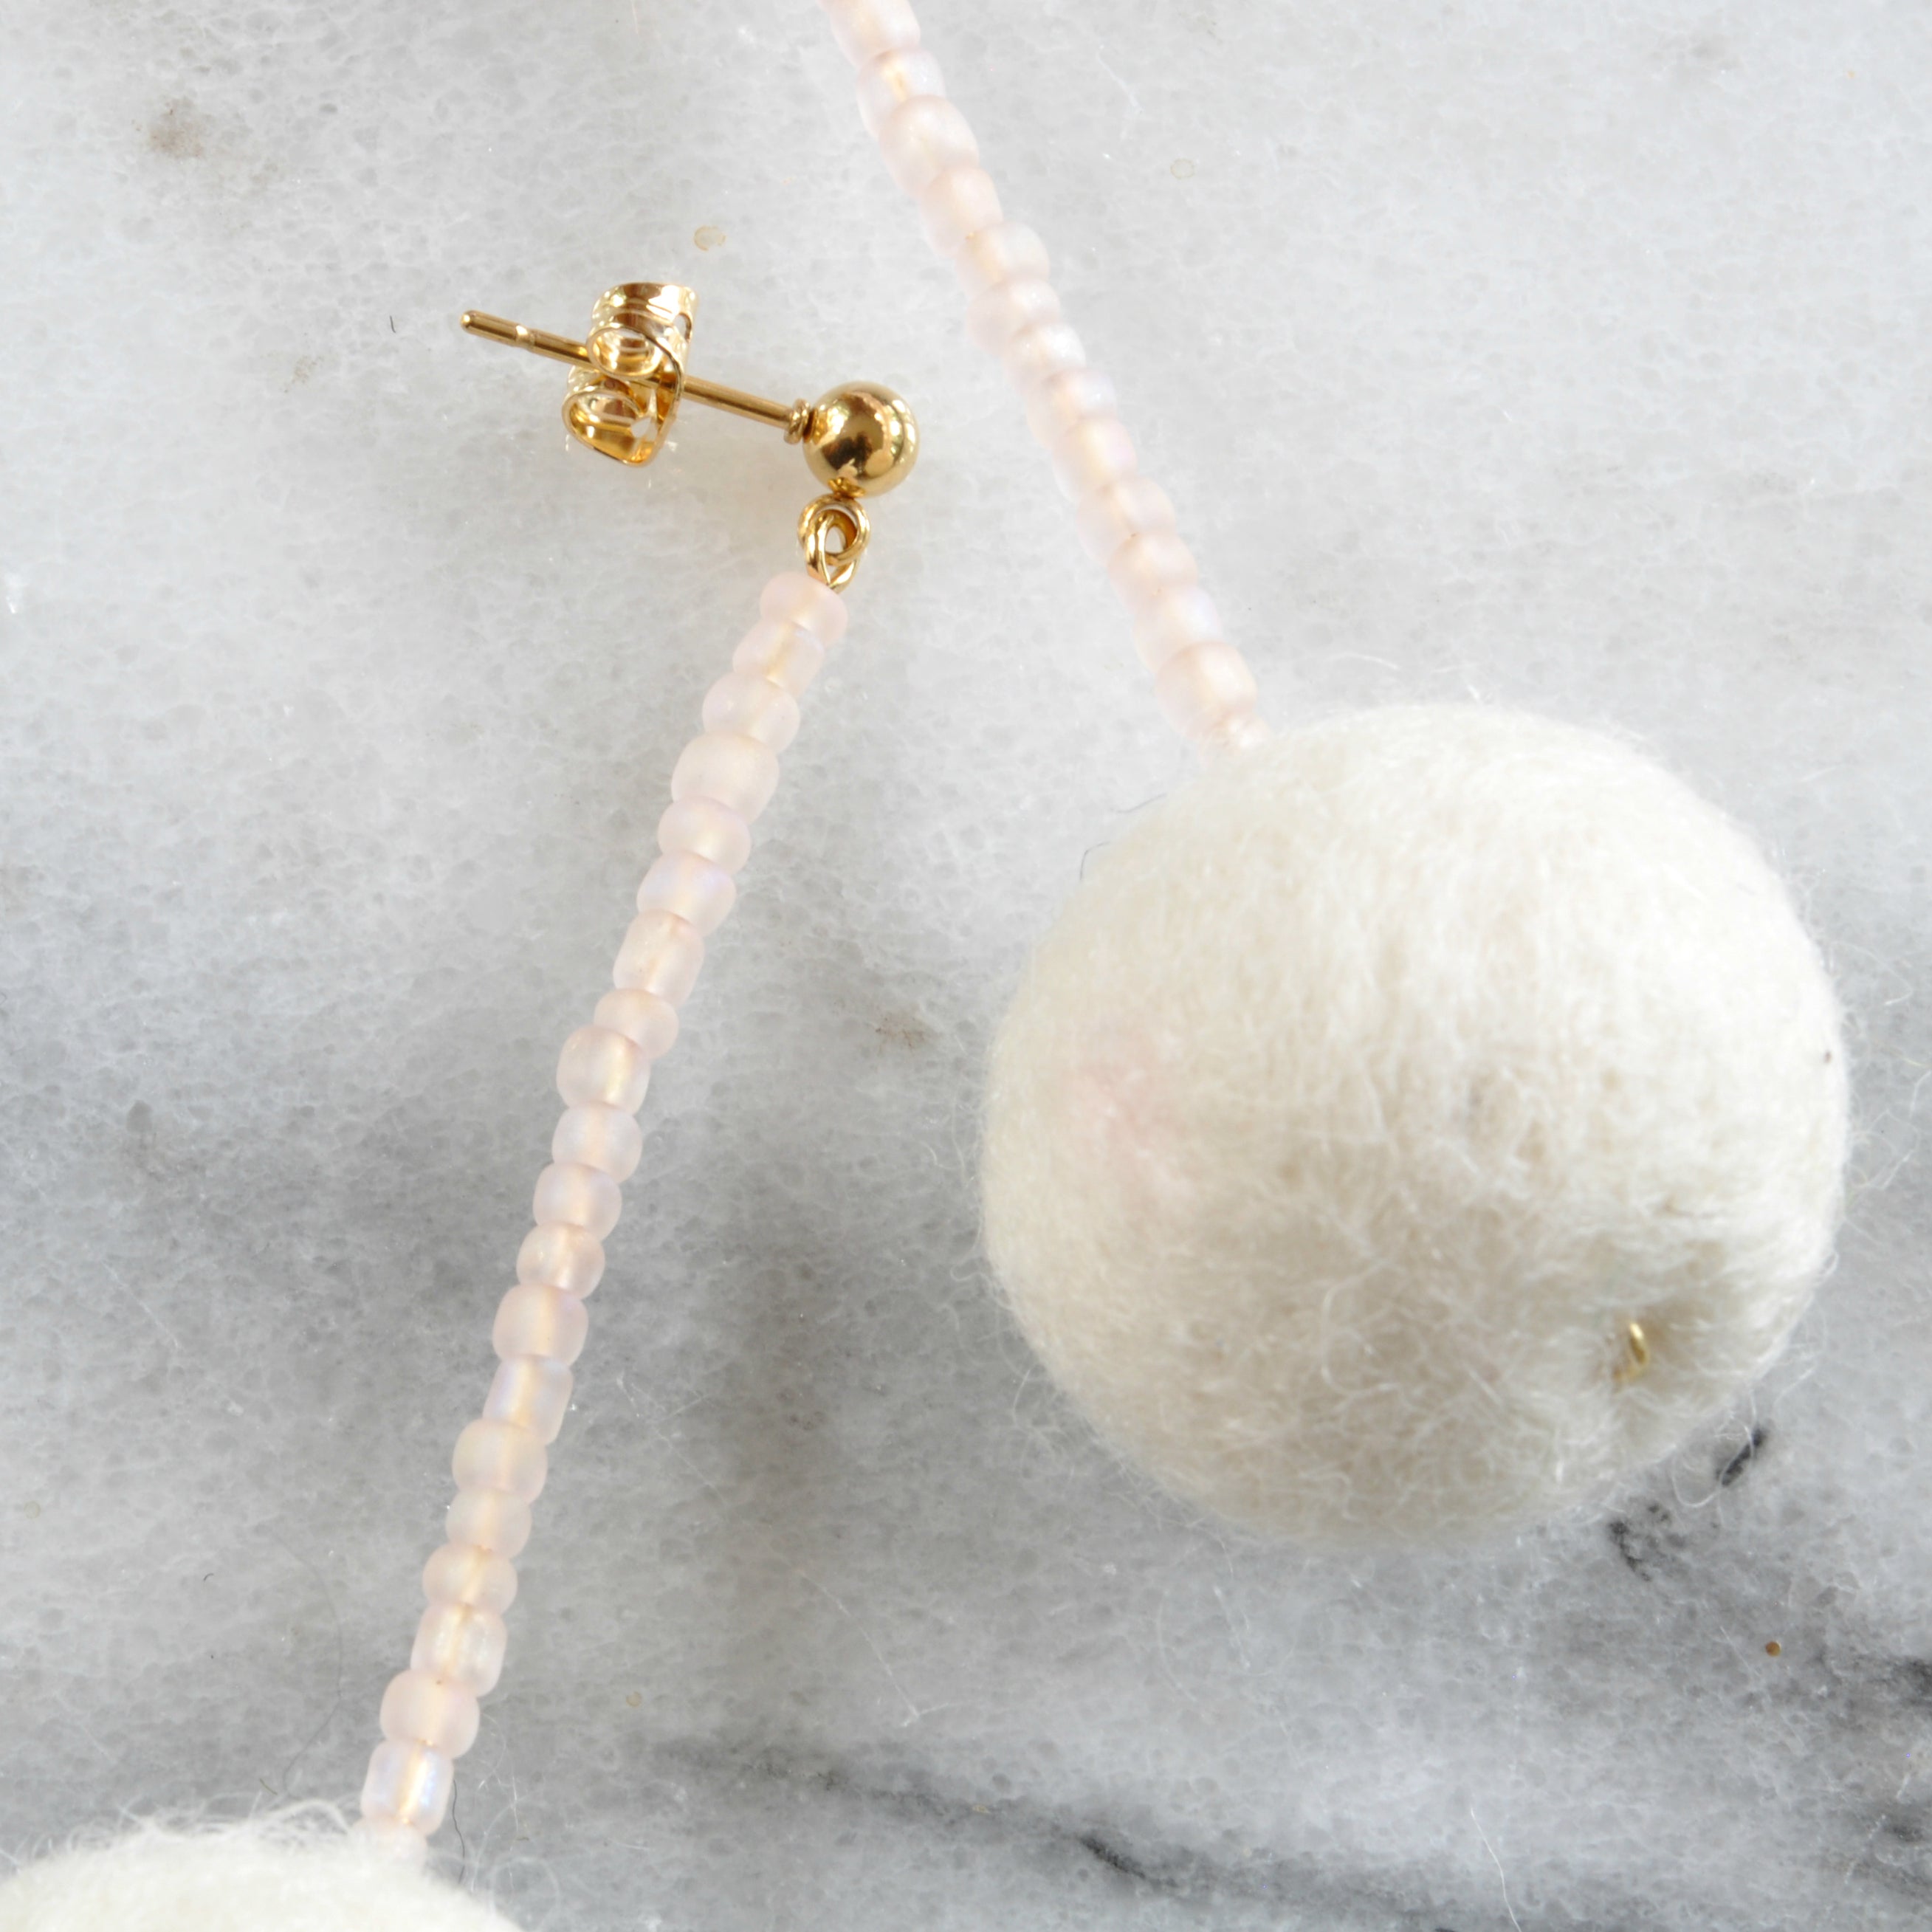 Libby & Smee pom pom earrings in Cream with Blush color combination, close up